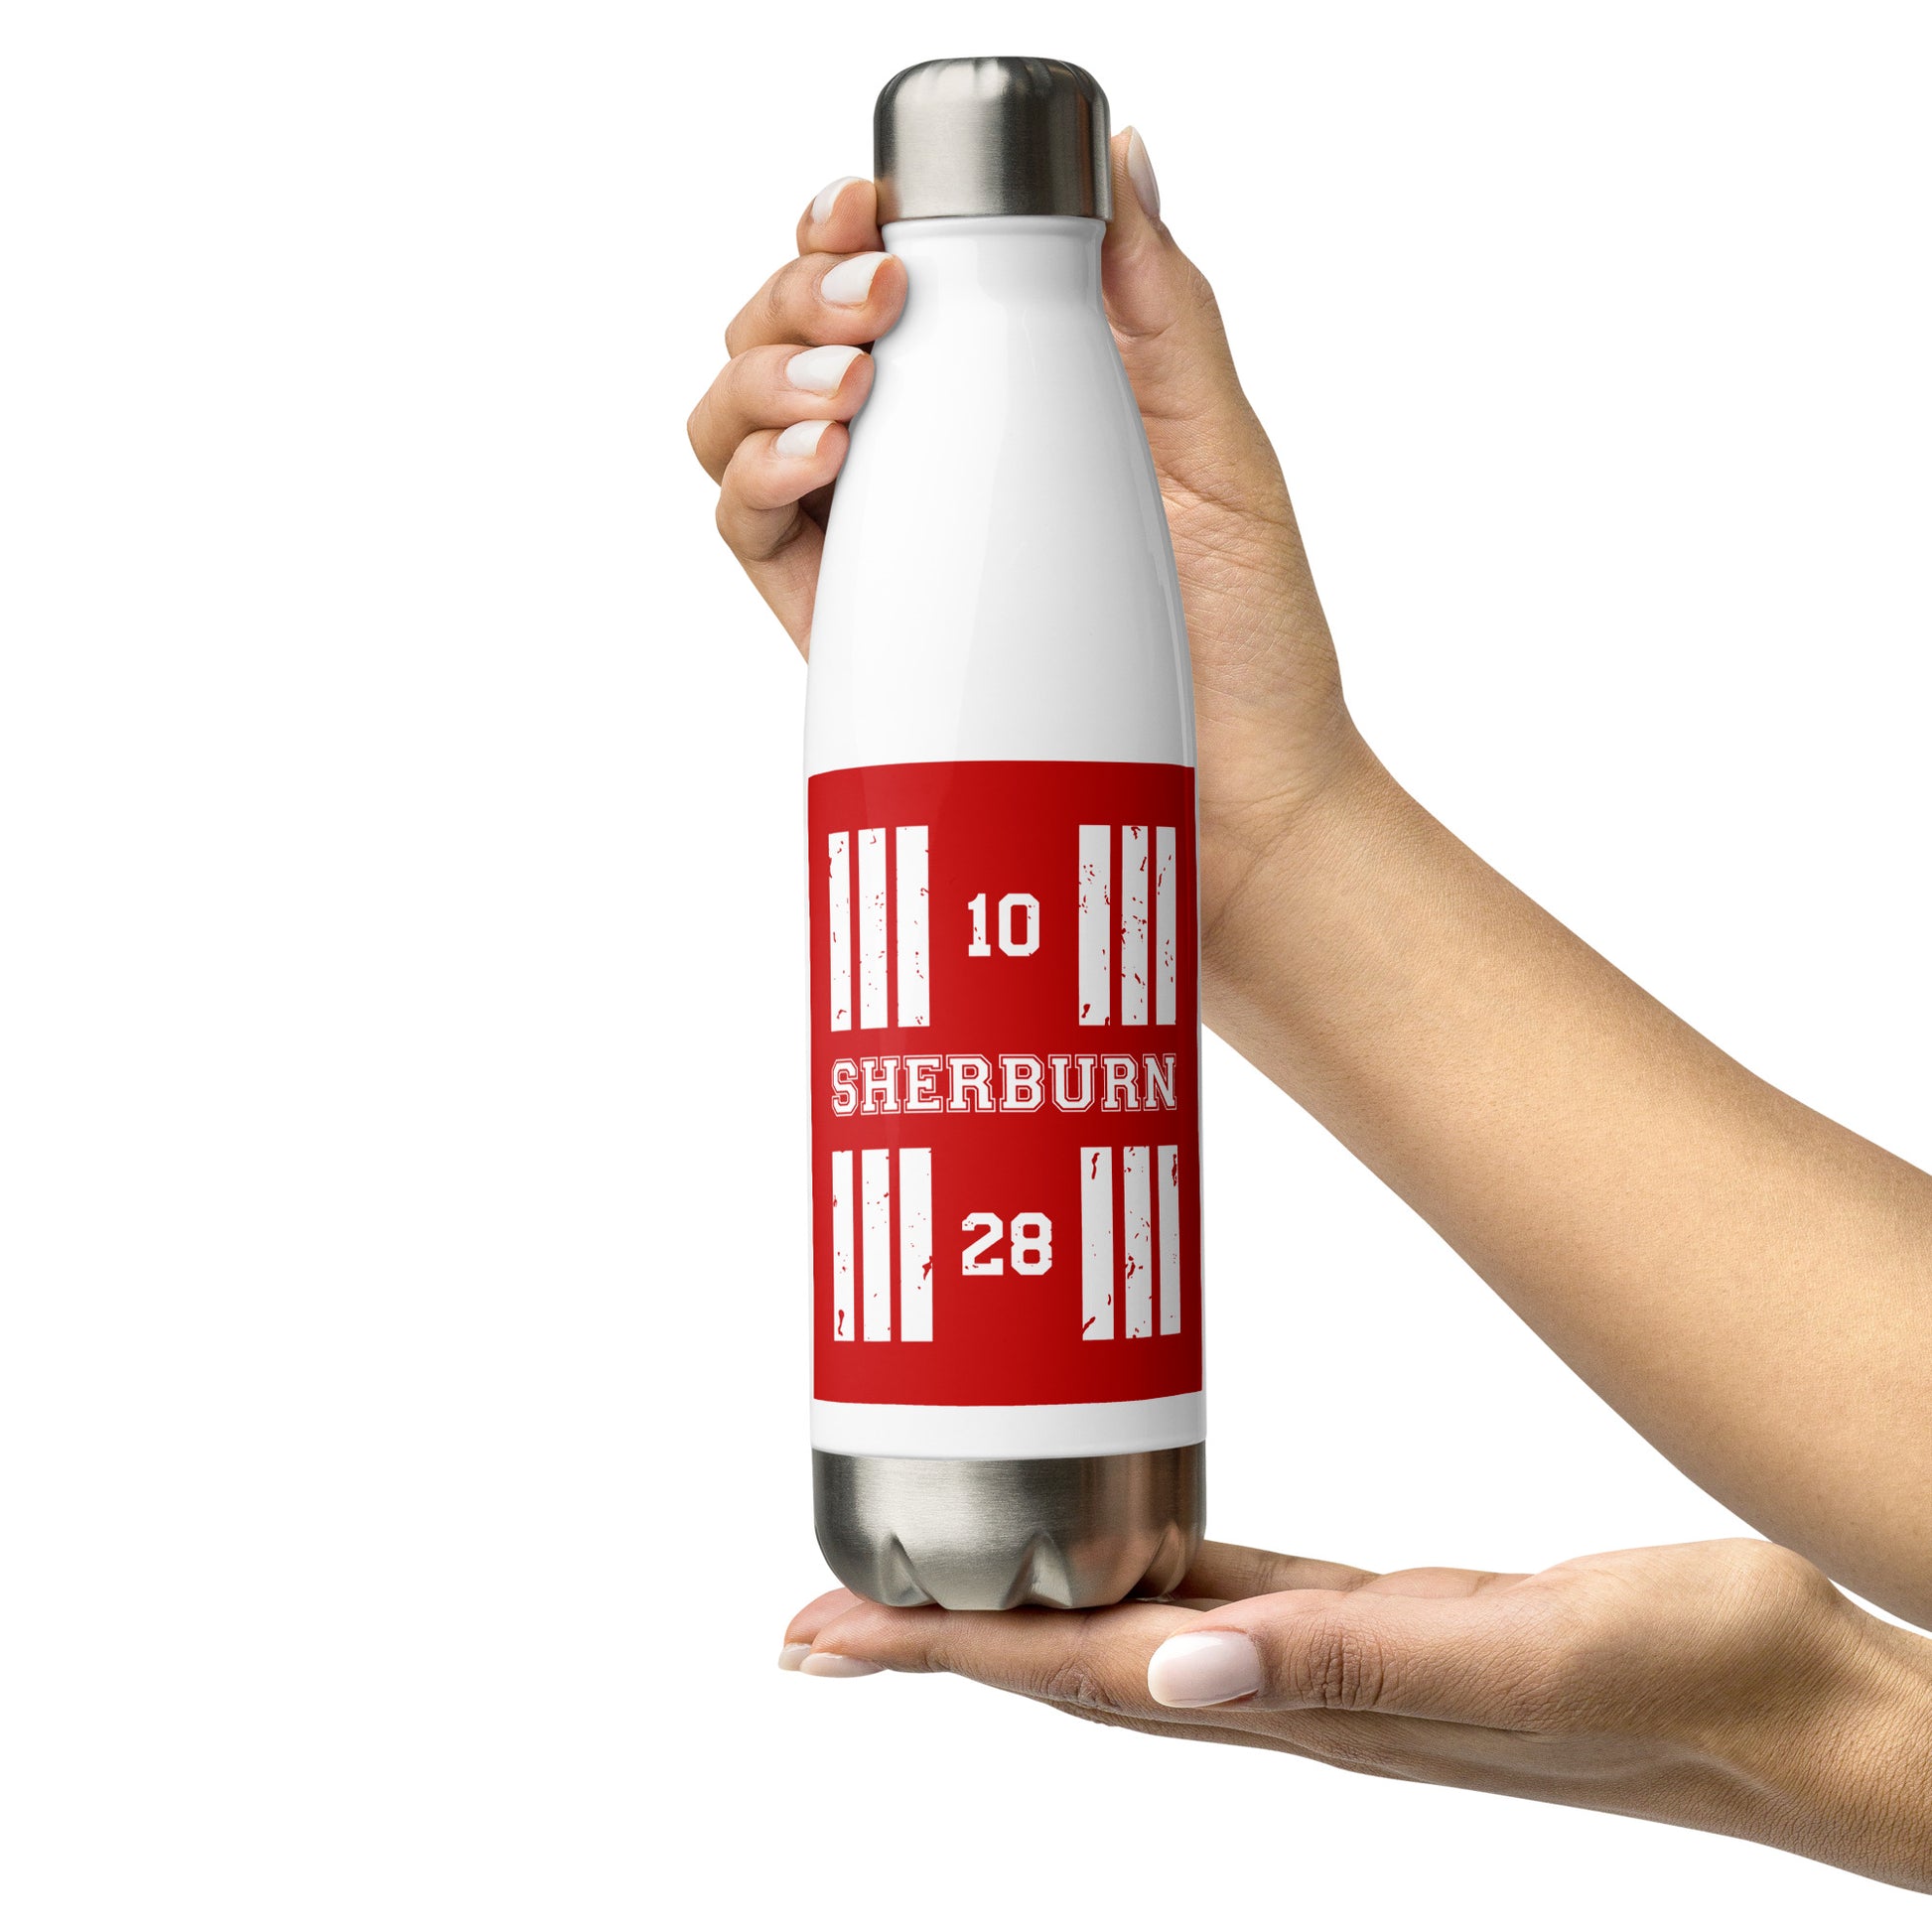 The Sherburn Airfield runway designator water bottle features a red print with the airport's name and designator framed by stylised threshold markings showing through.